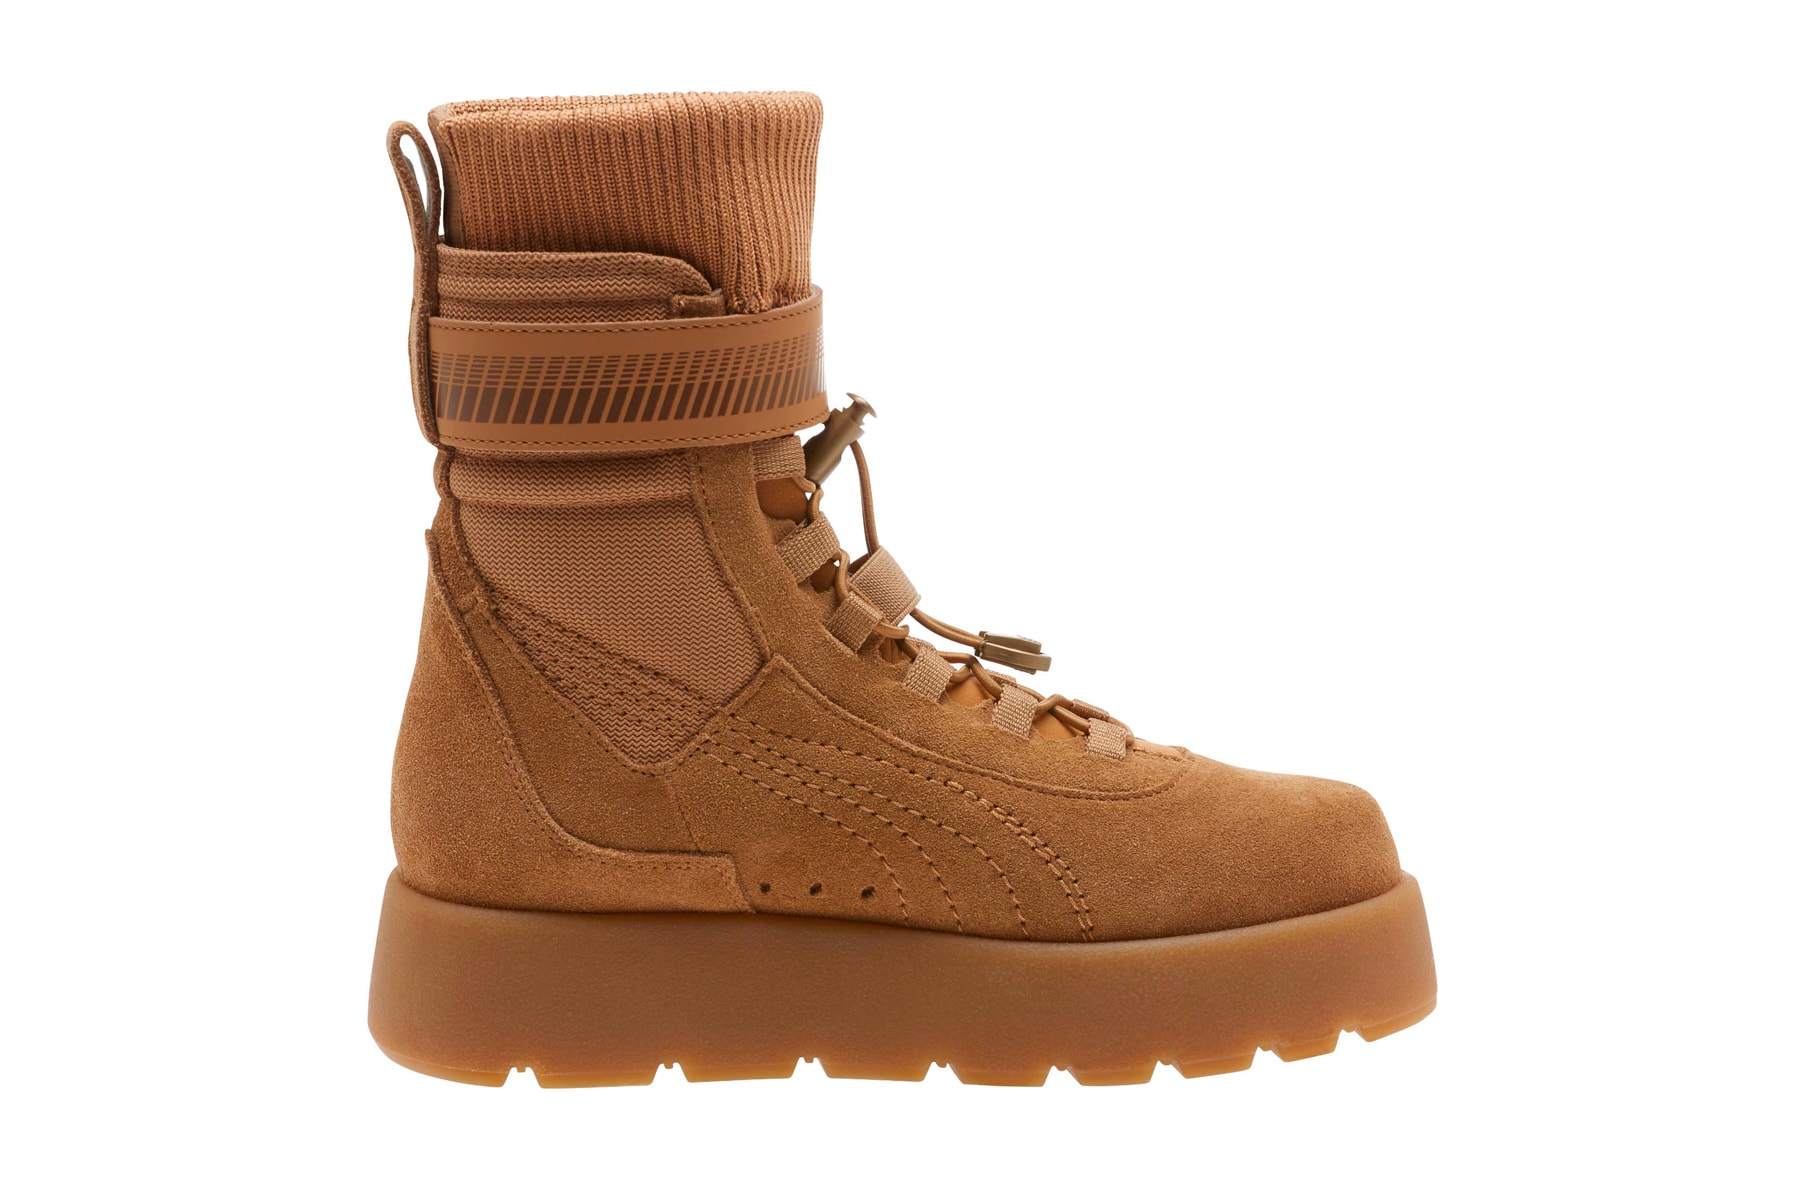 Rihanna Fenty PUMA Scuba Boot Brush Brown Tan Desert Footwear Spring Summer 2018 Colorway Shop Where to Buy Price Release Date Information Women's Shoes Festival